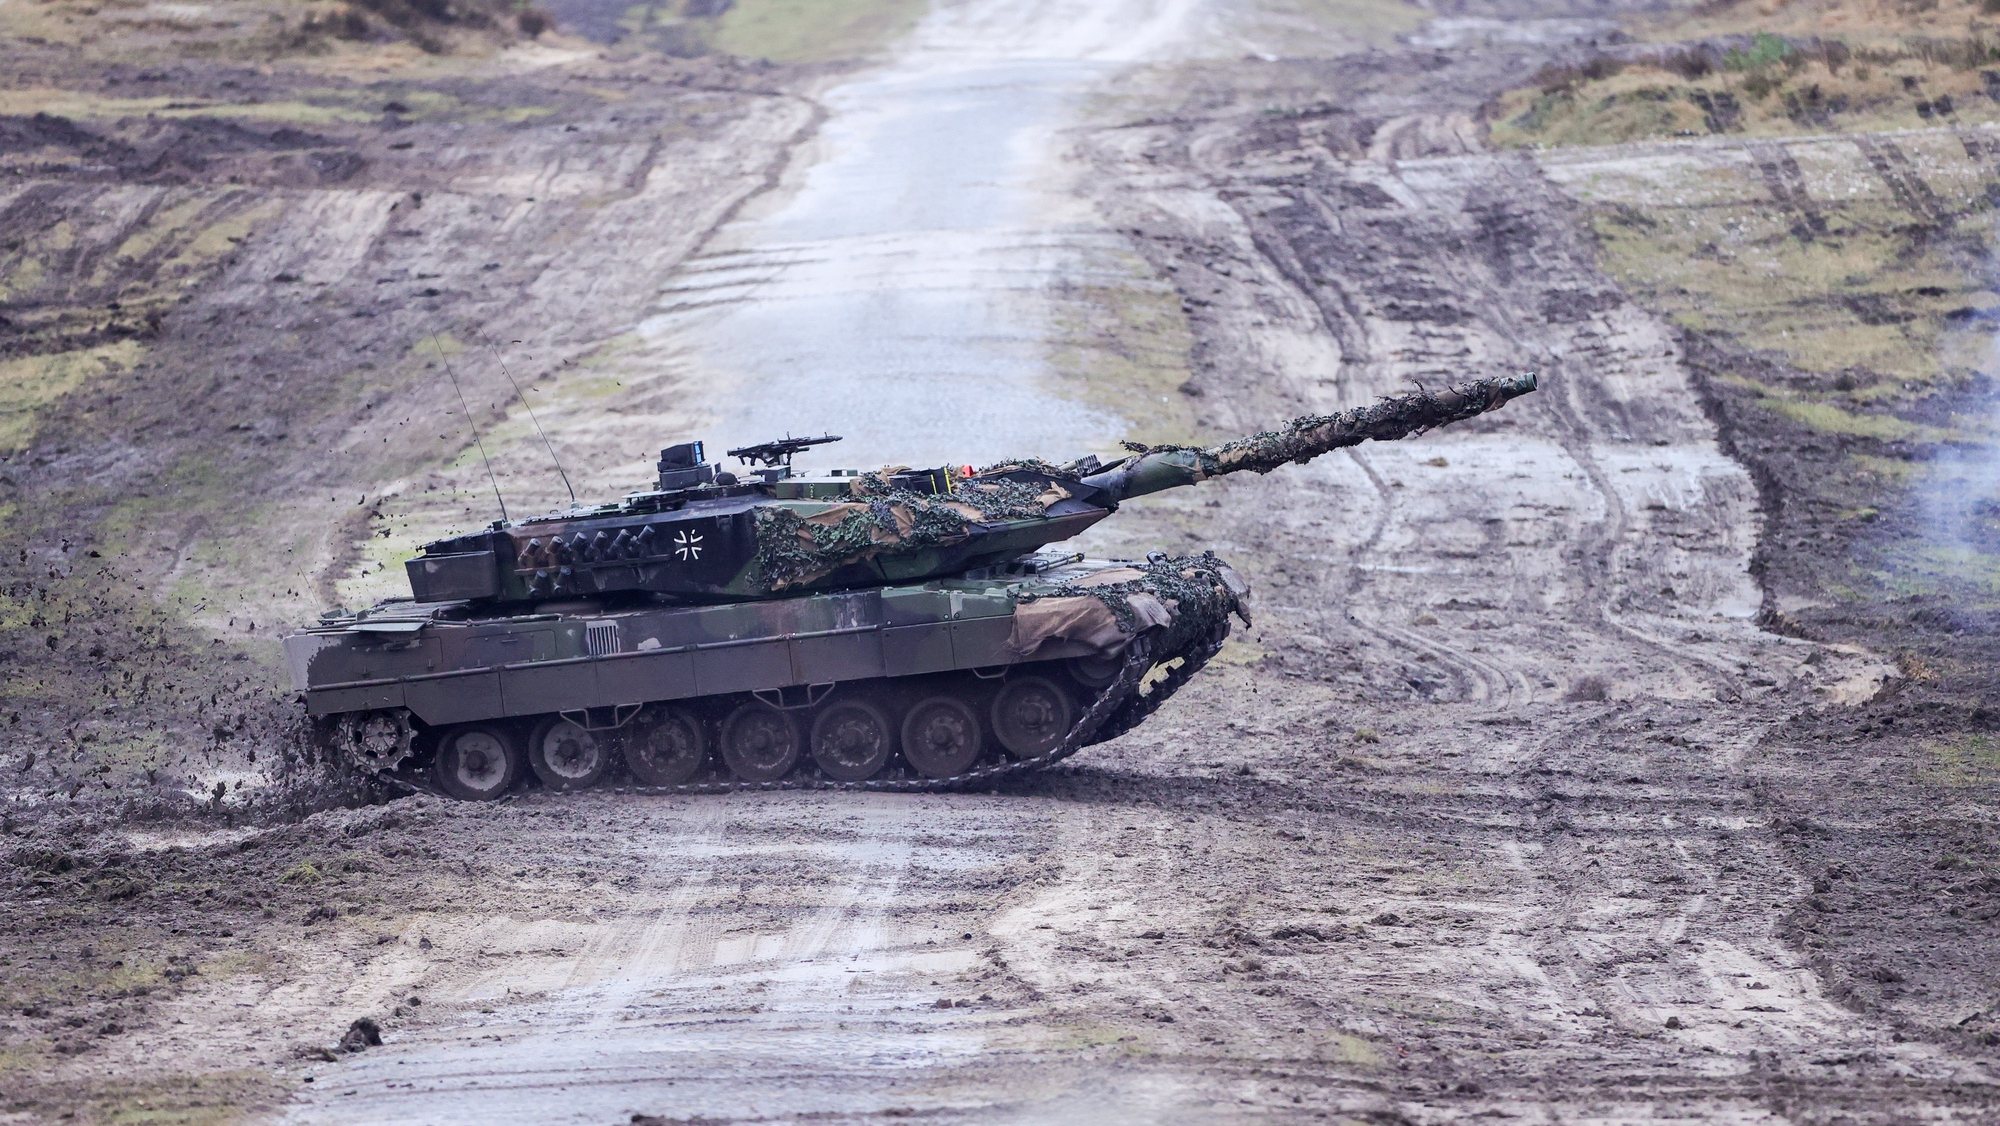 epa10442778 A &#039;Leopard 2 A6&#039; battle tank in action during a visit of German Defense Minister Pistorius (not pictured) to German armed forces Bundeswehr soldiers of the tank battalion 203 in Augustdorf, Germany, 01 February 2023. According to the German government&#039;s decision to supply 14 Leopard 2 tanks to Ukraine, Pistorius got informed about the performance of the weapon system.  EPA/FRIEDEMANN VOGEL